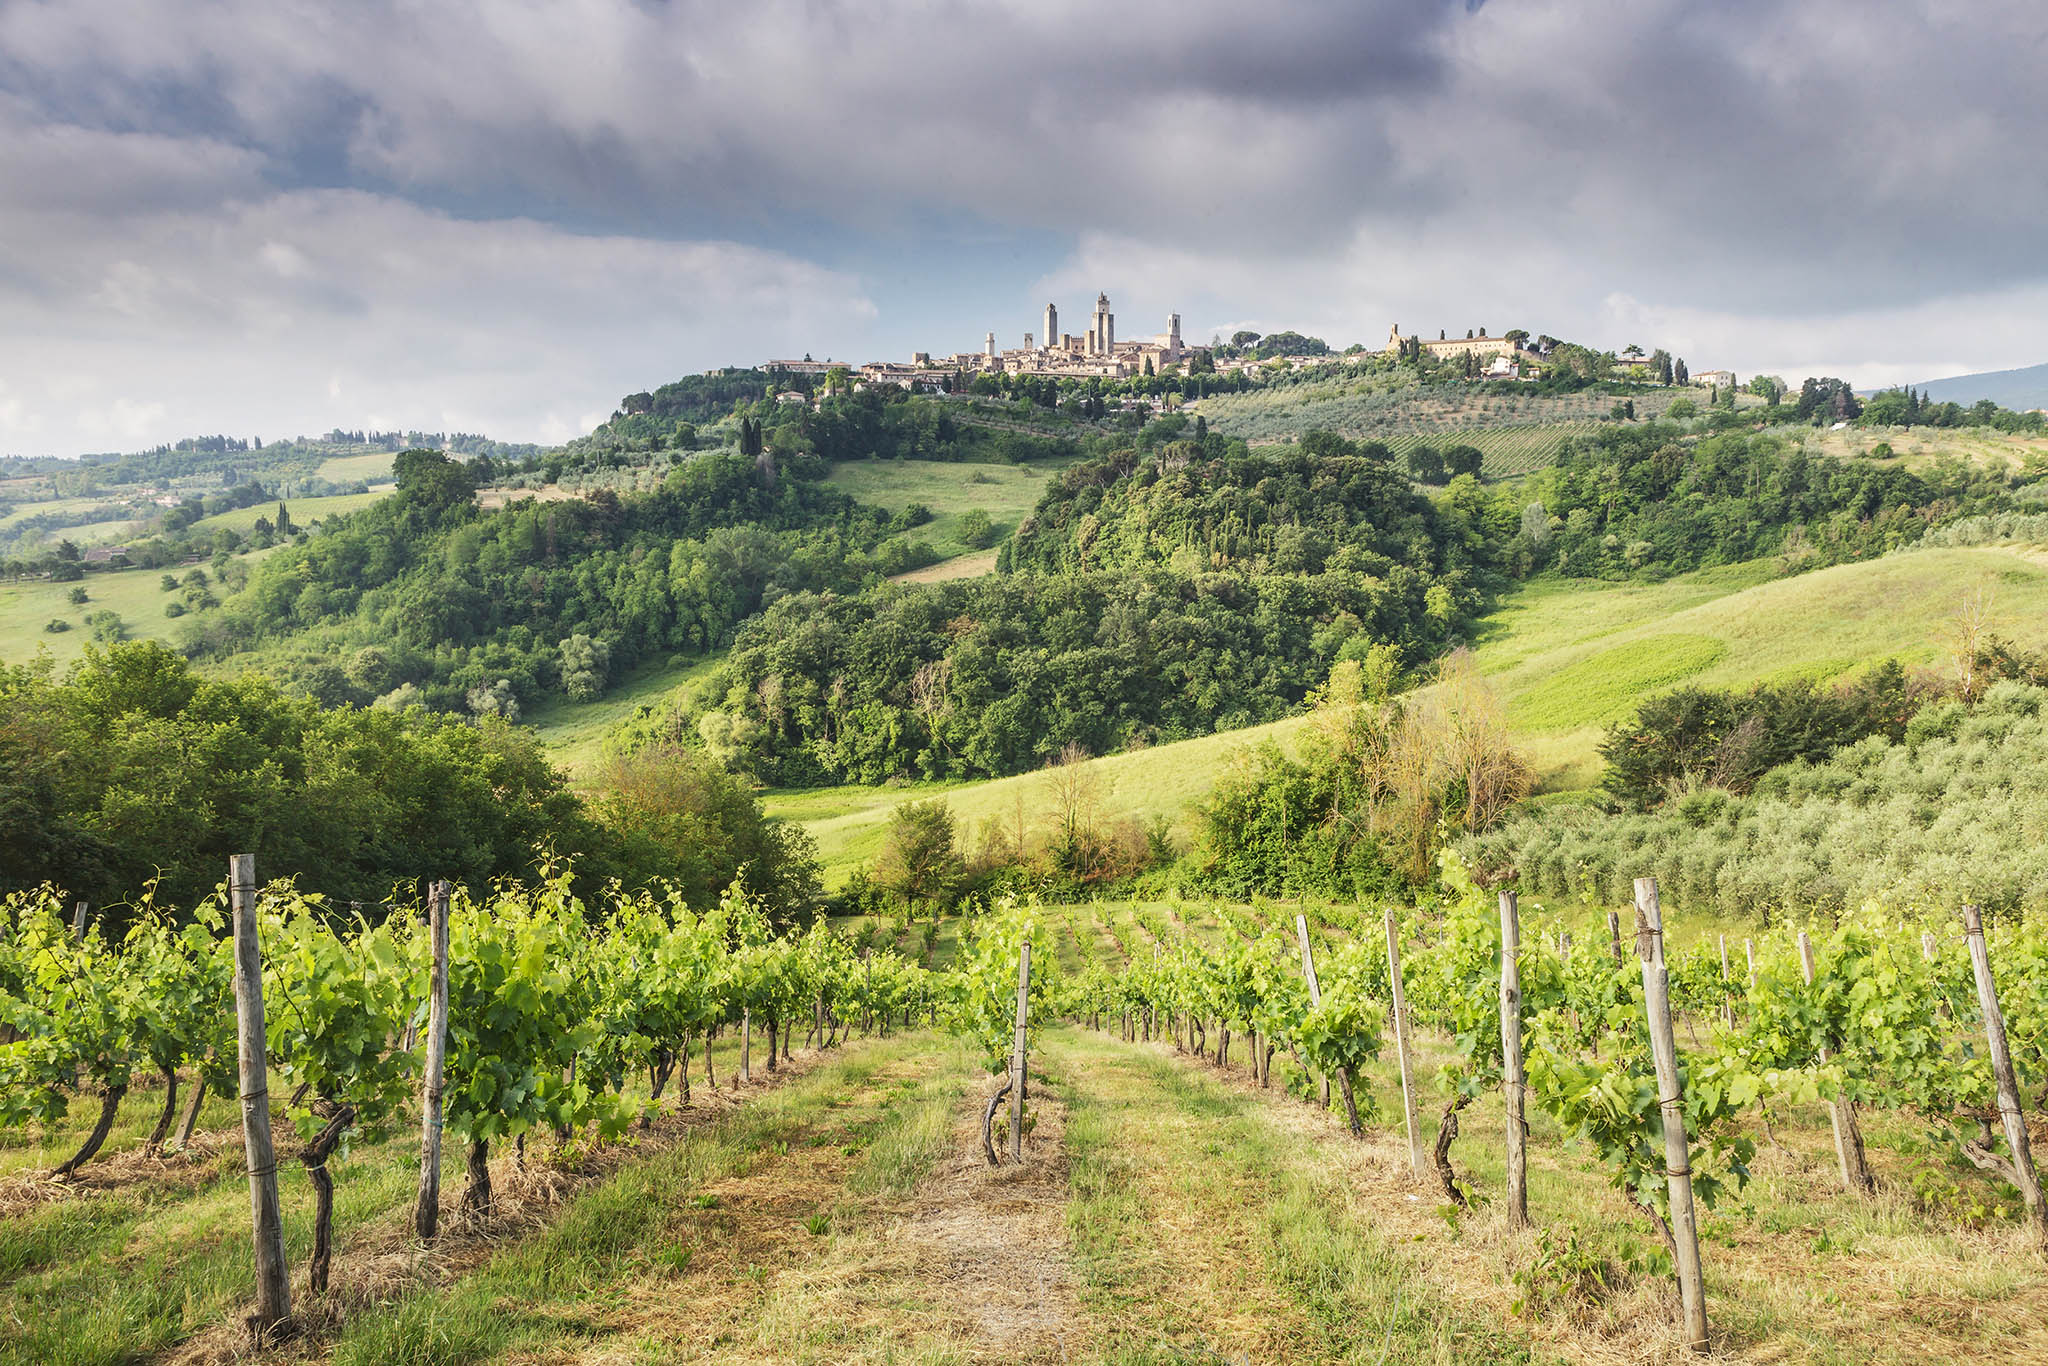 Vineyards near to San Gimignano, Tuscany. The town also is known for the white wine, Vernaccia di San Gimignano, produced from the ancient variety of Vernaccia grape which is grown on the sandstone hillsides of the area.